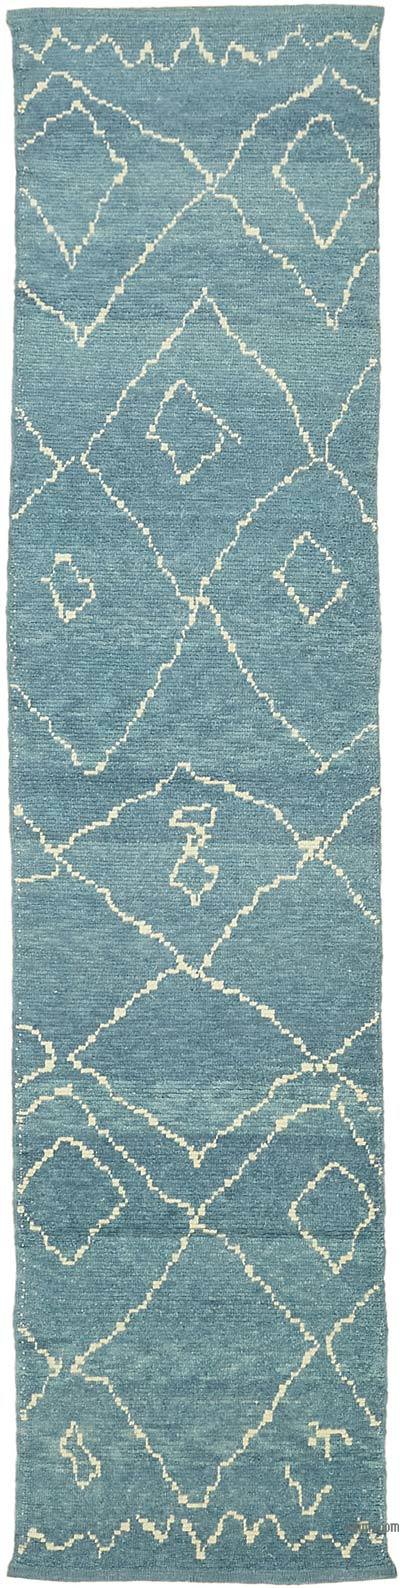 New Moroccan Style Hand-Knotted Runner - 2' 10" x 12' 2" (34 in. x 146 in.)